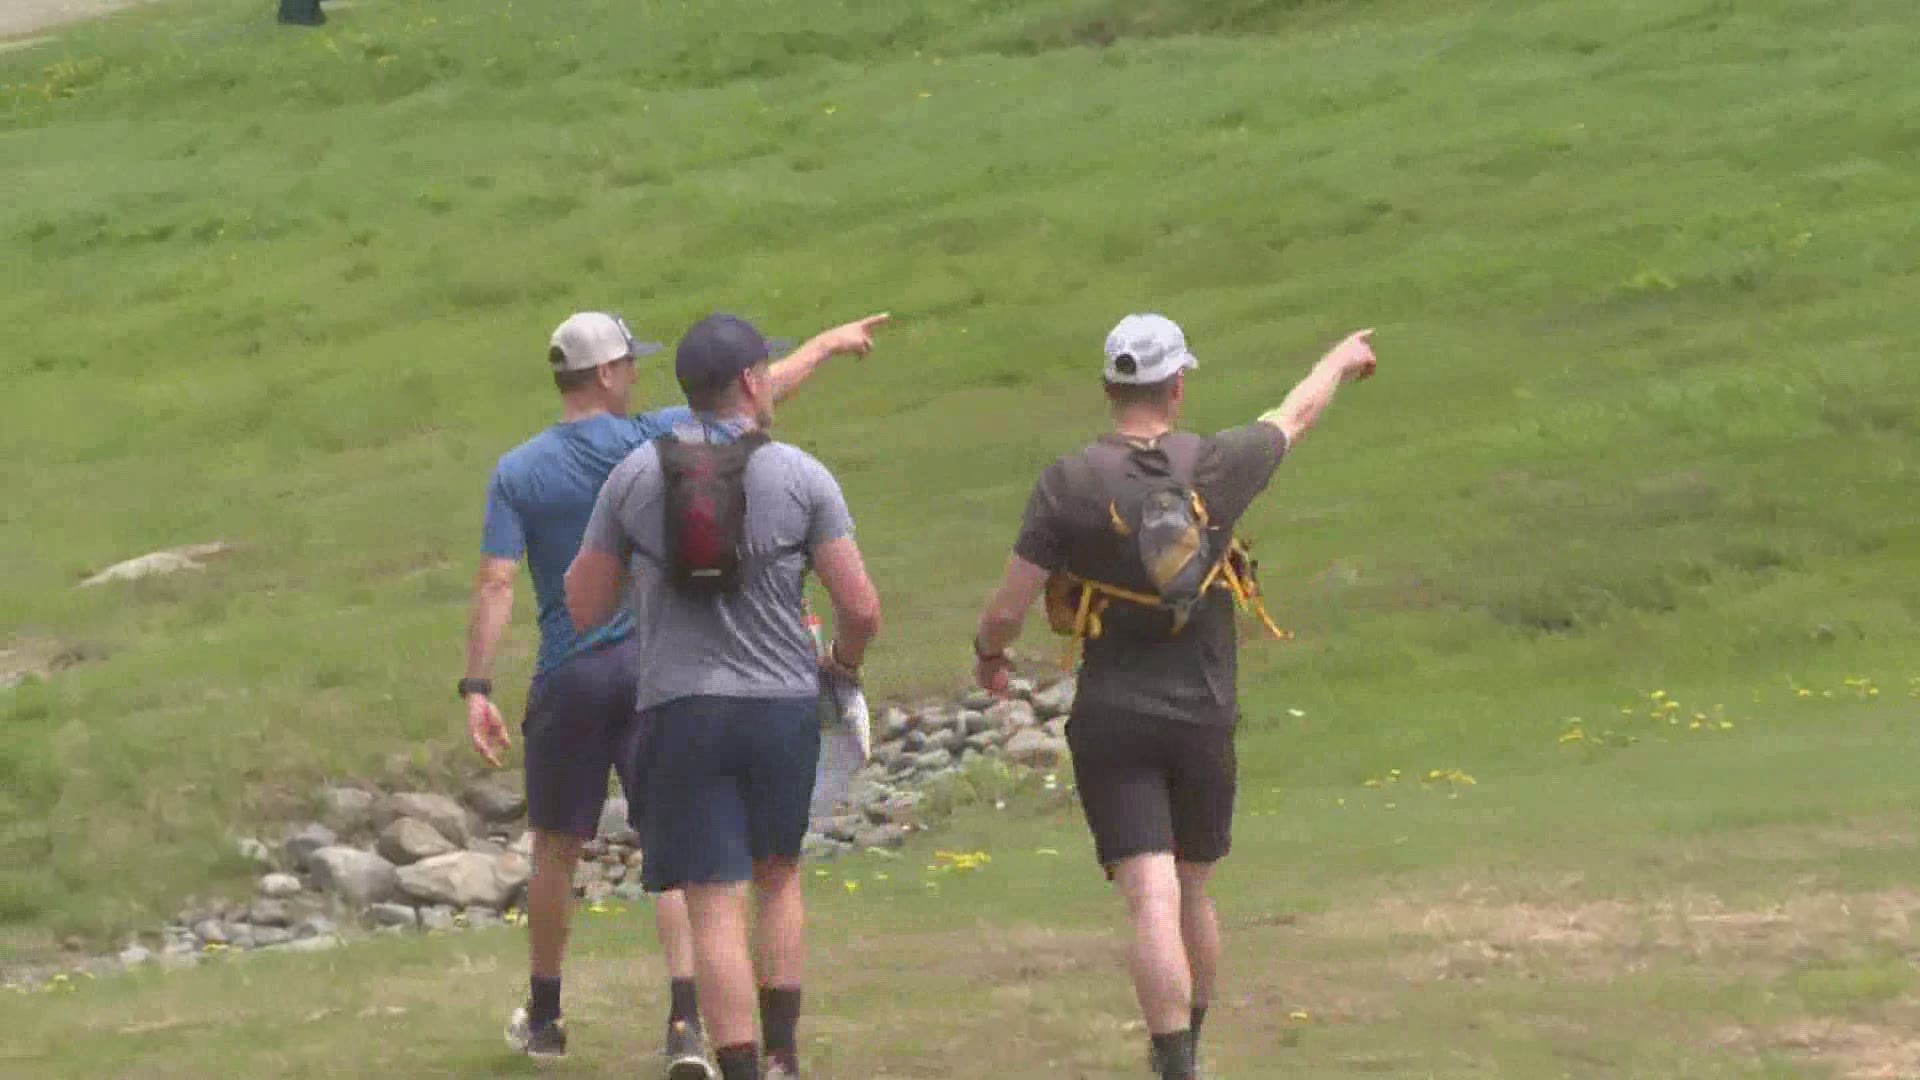 On Saturday, Allie Skelley hiked Saddleback and Suglarloaf as he aims to raise $25,000 for the Travis Roy Foundation